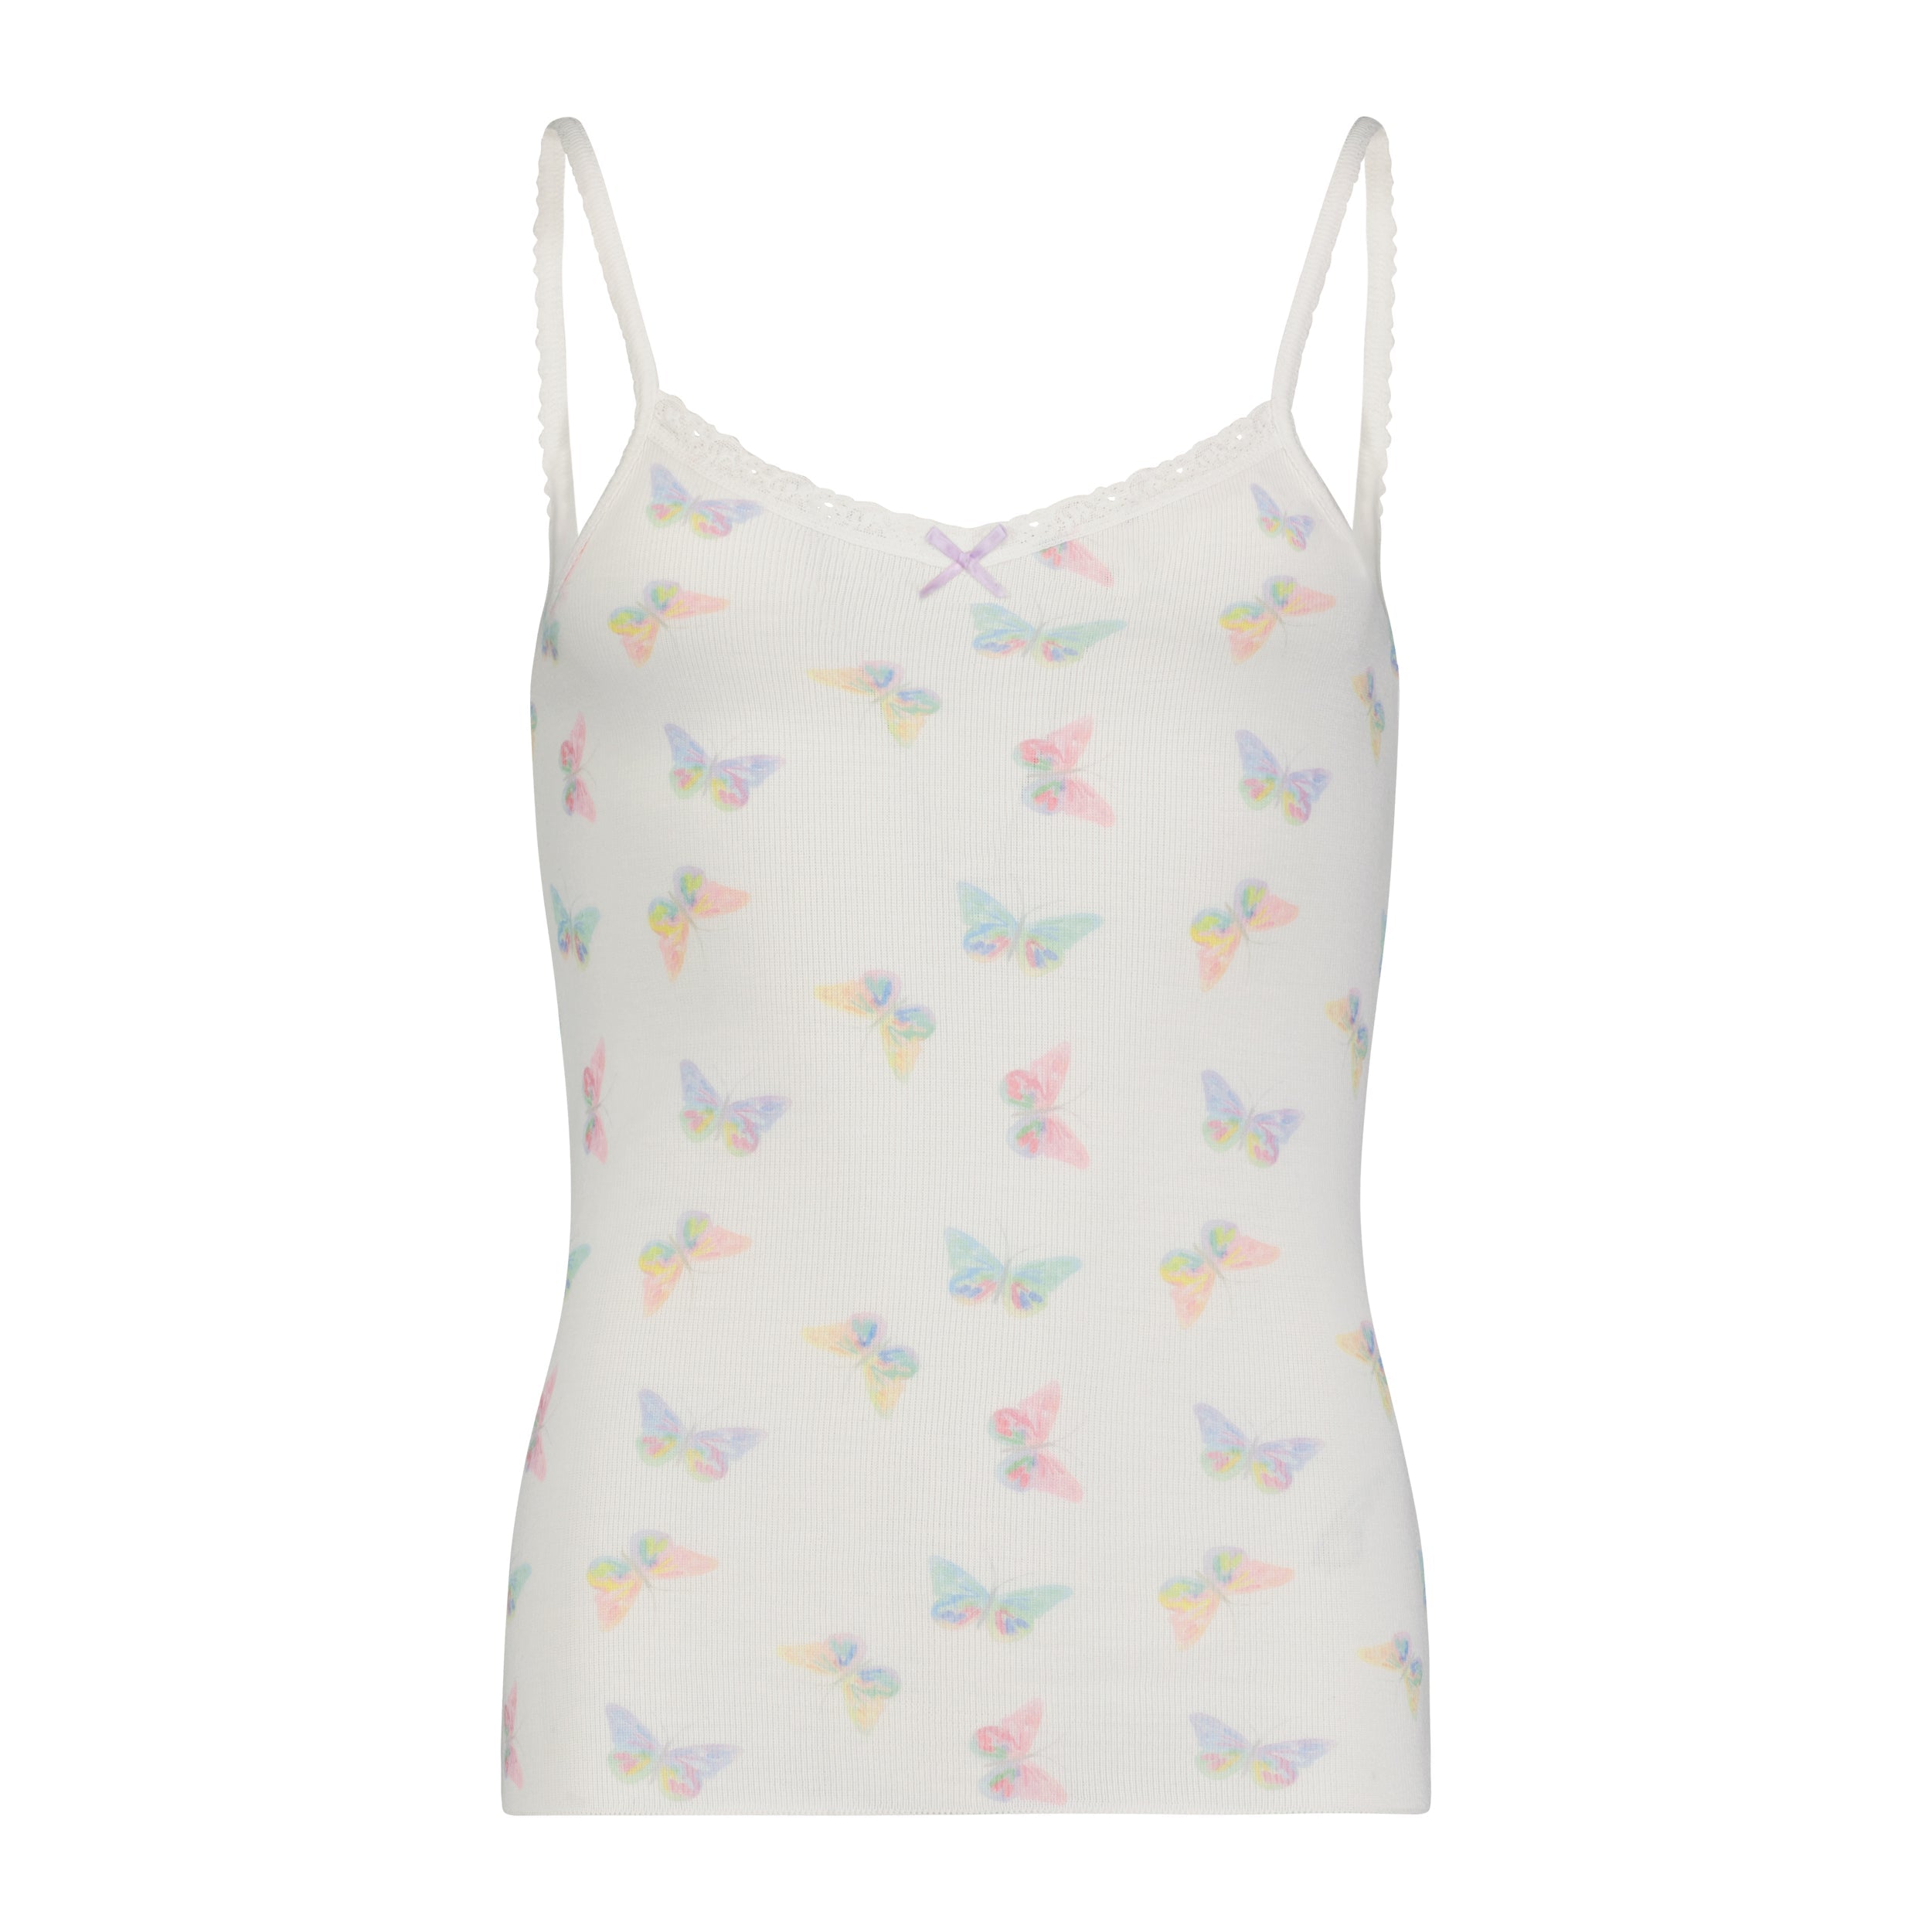 BUTTERFLY Print PATTI CAMISOLE